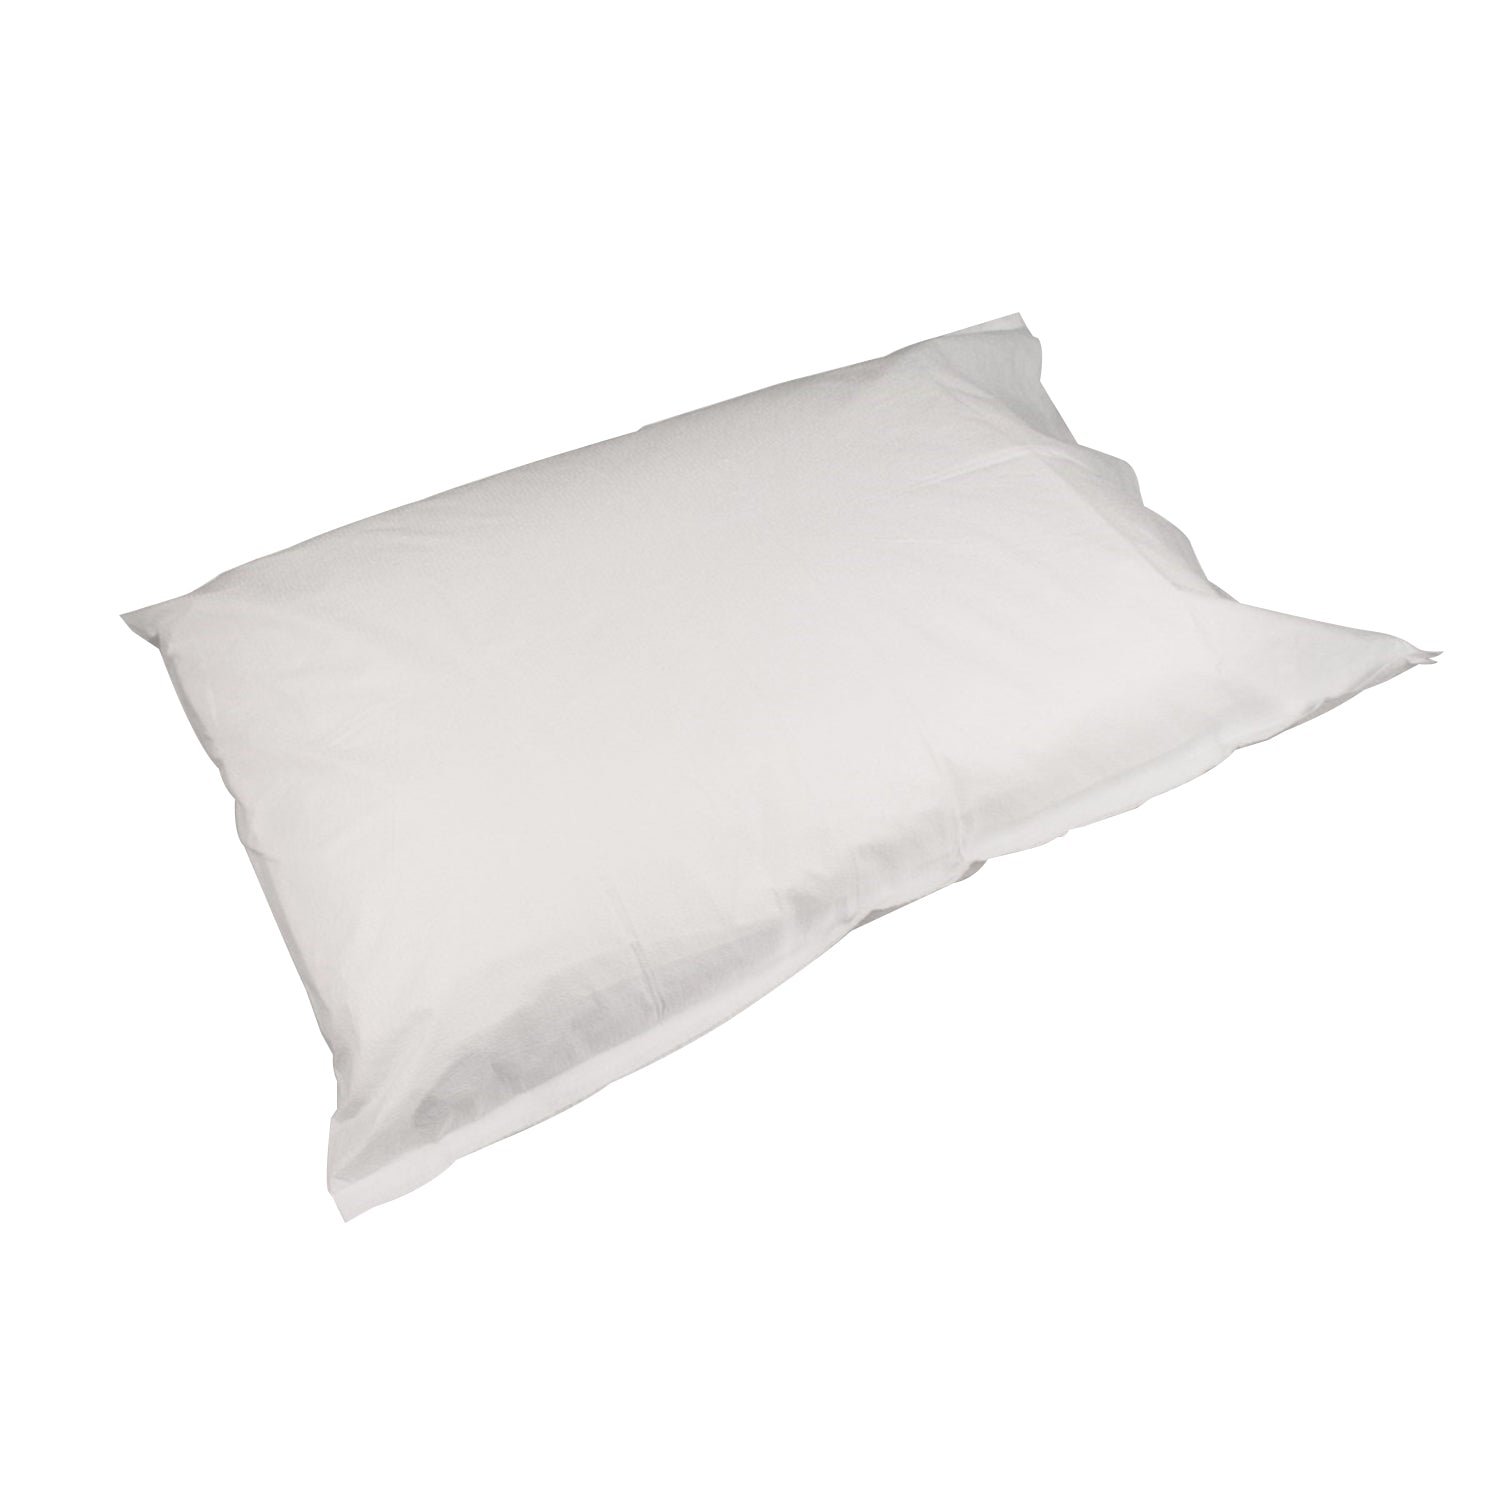 Bedding | First Aid Supply Stores